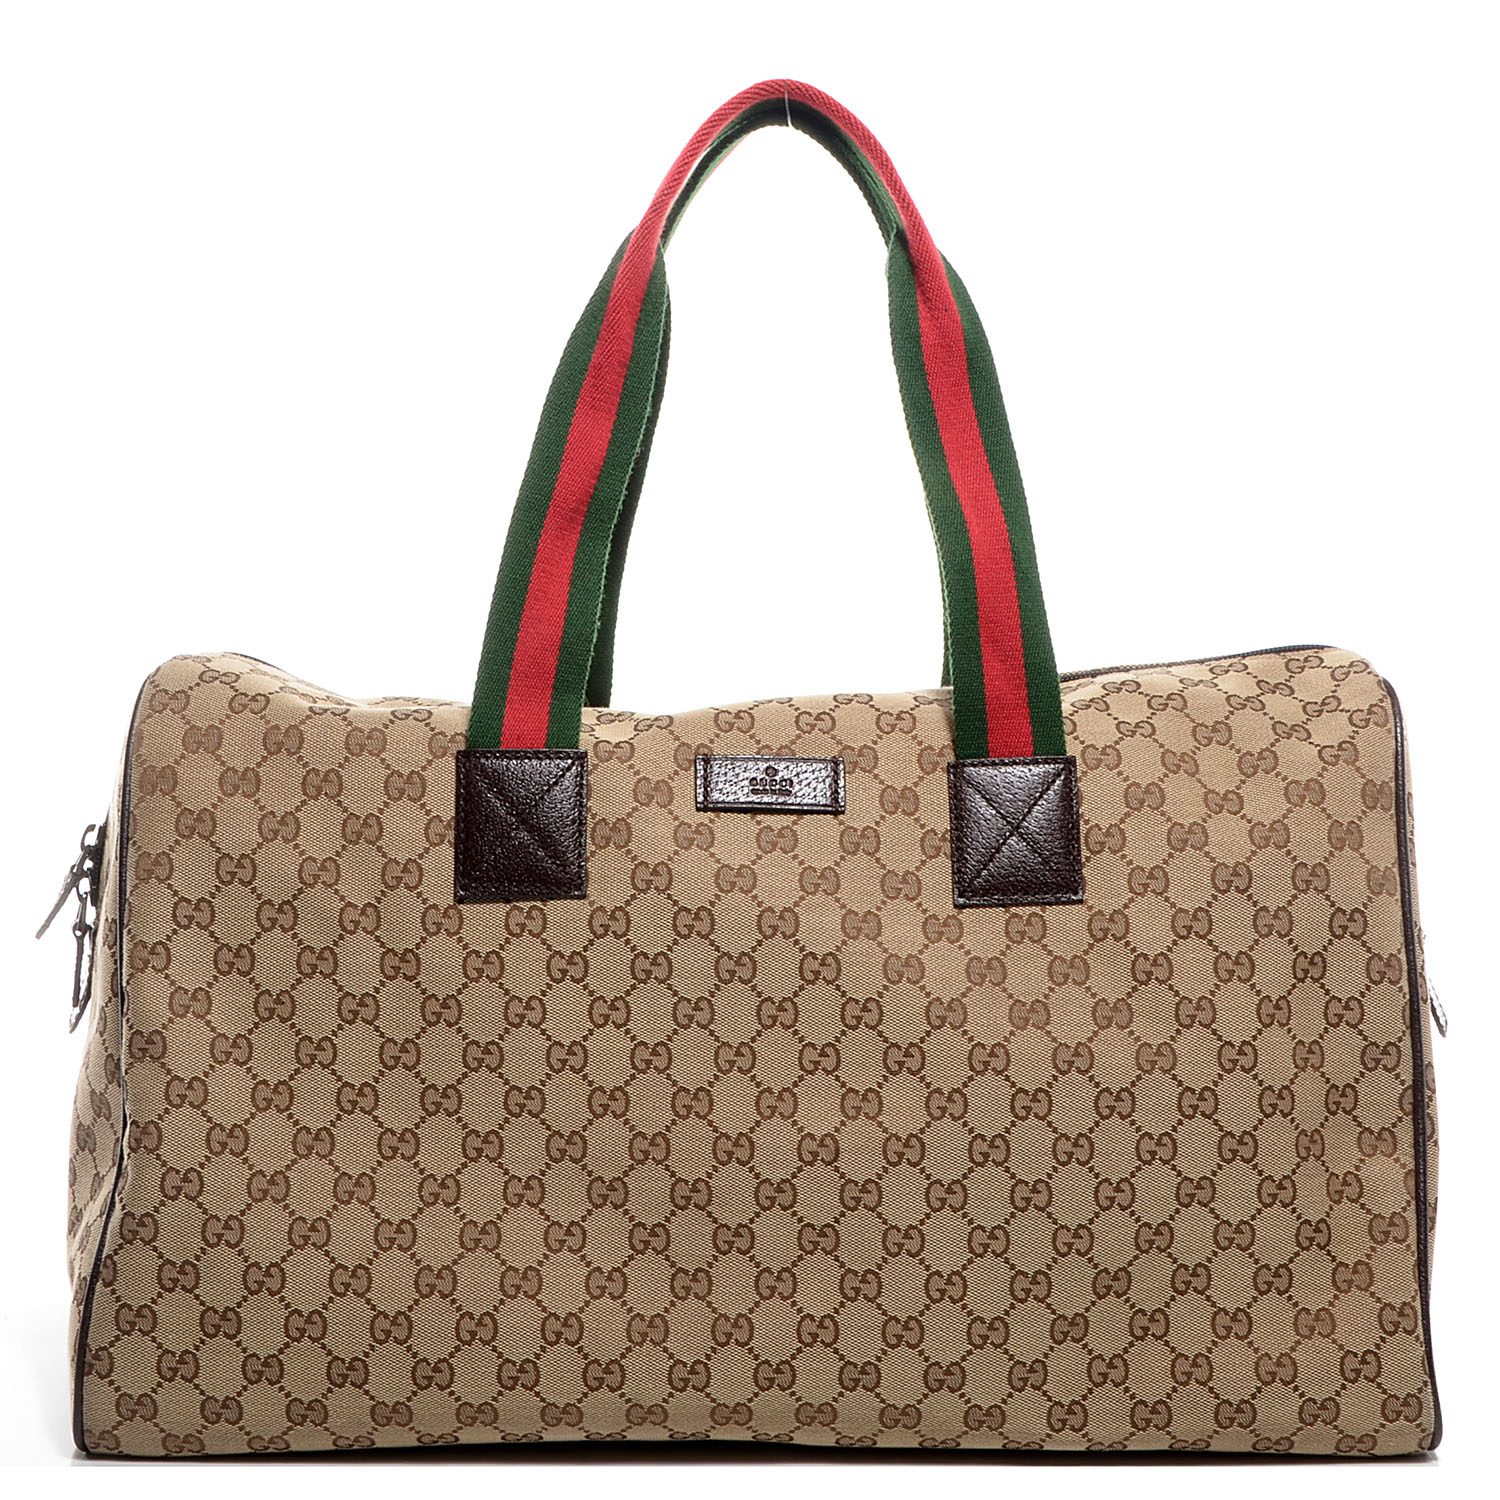 GUCCI Monogram Large Web Carry On Duffle Bag Brown 77250